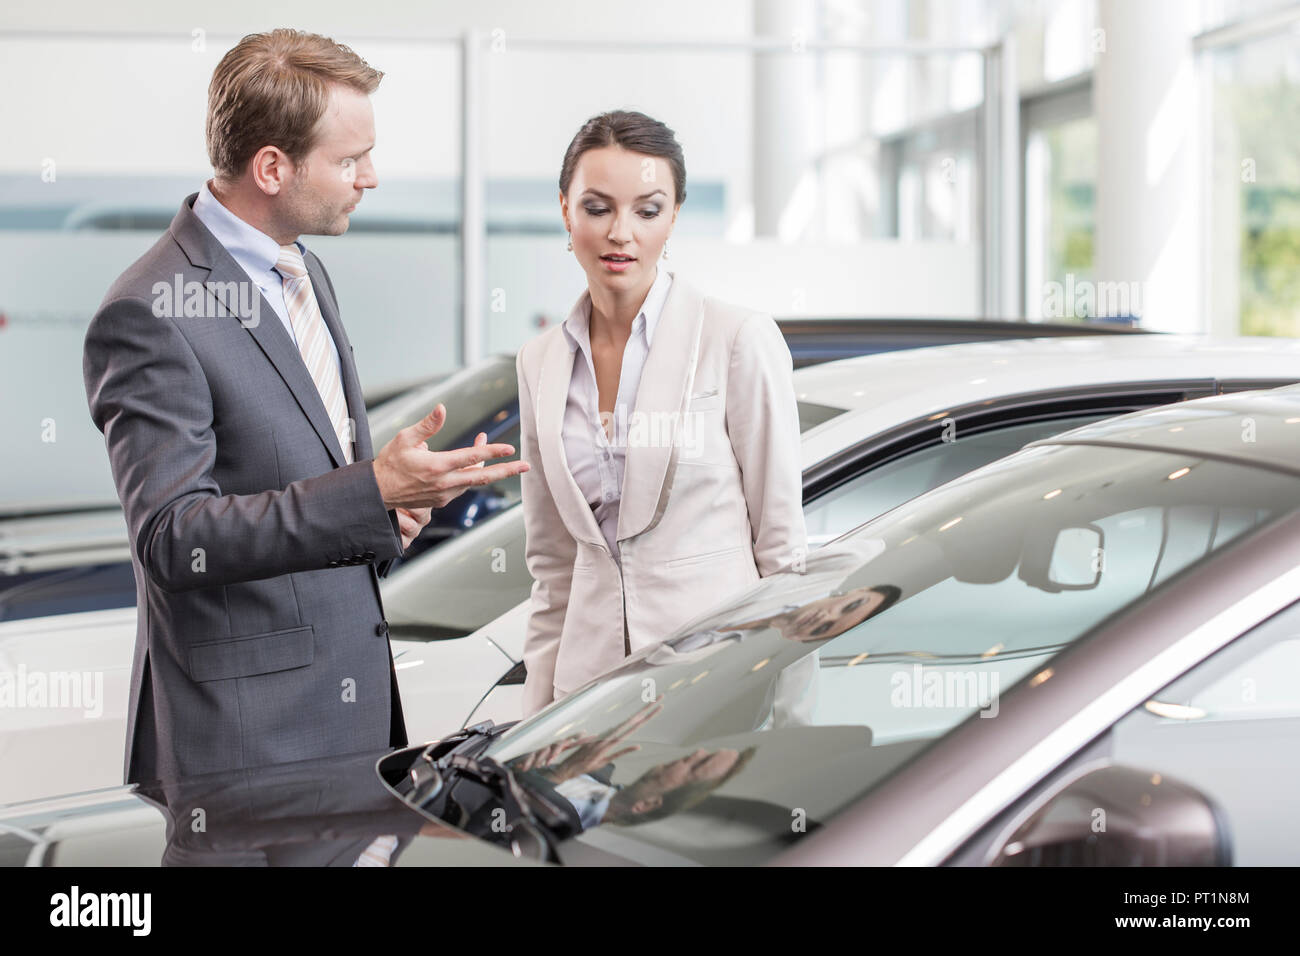 At the car dealer, Salesman showing new car to client Stock Photo